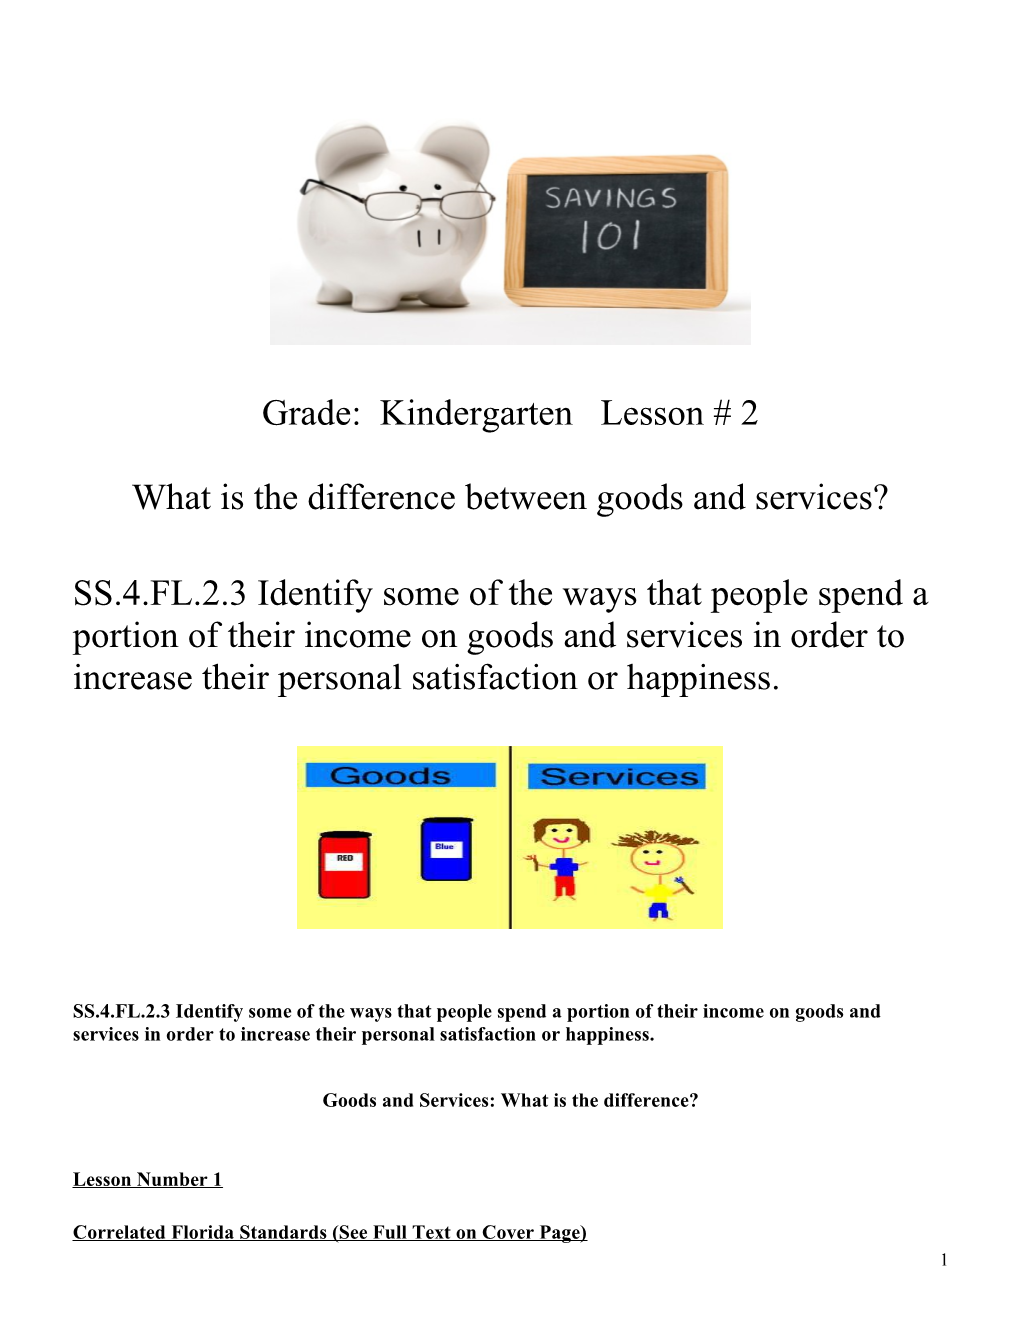 What Is the Difference Between Goods and Services?